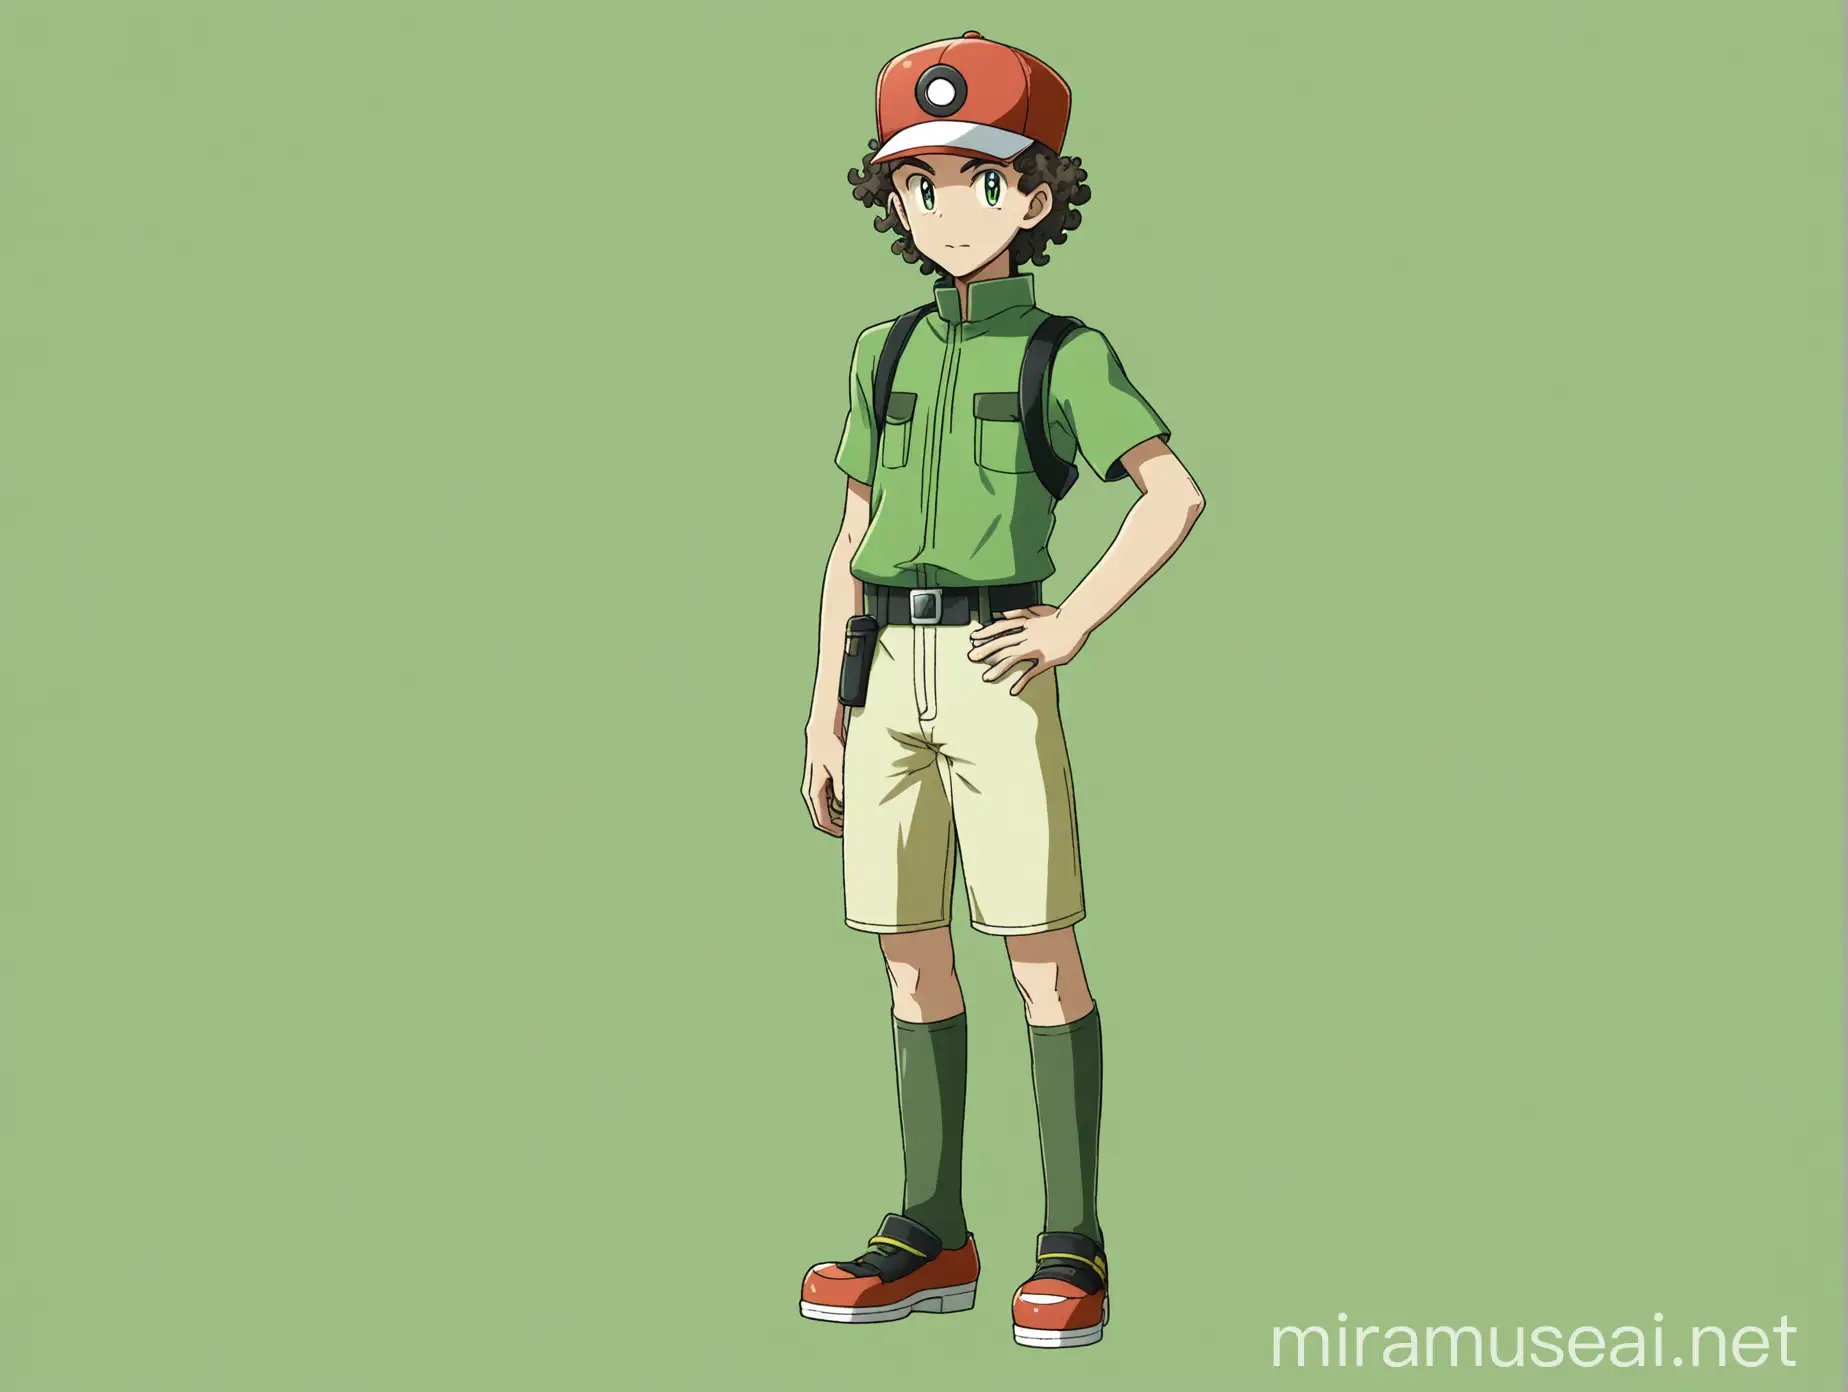 Pokemon Trainer with Curly Hair in Green Uniform